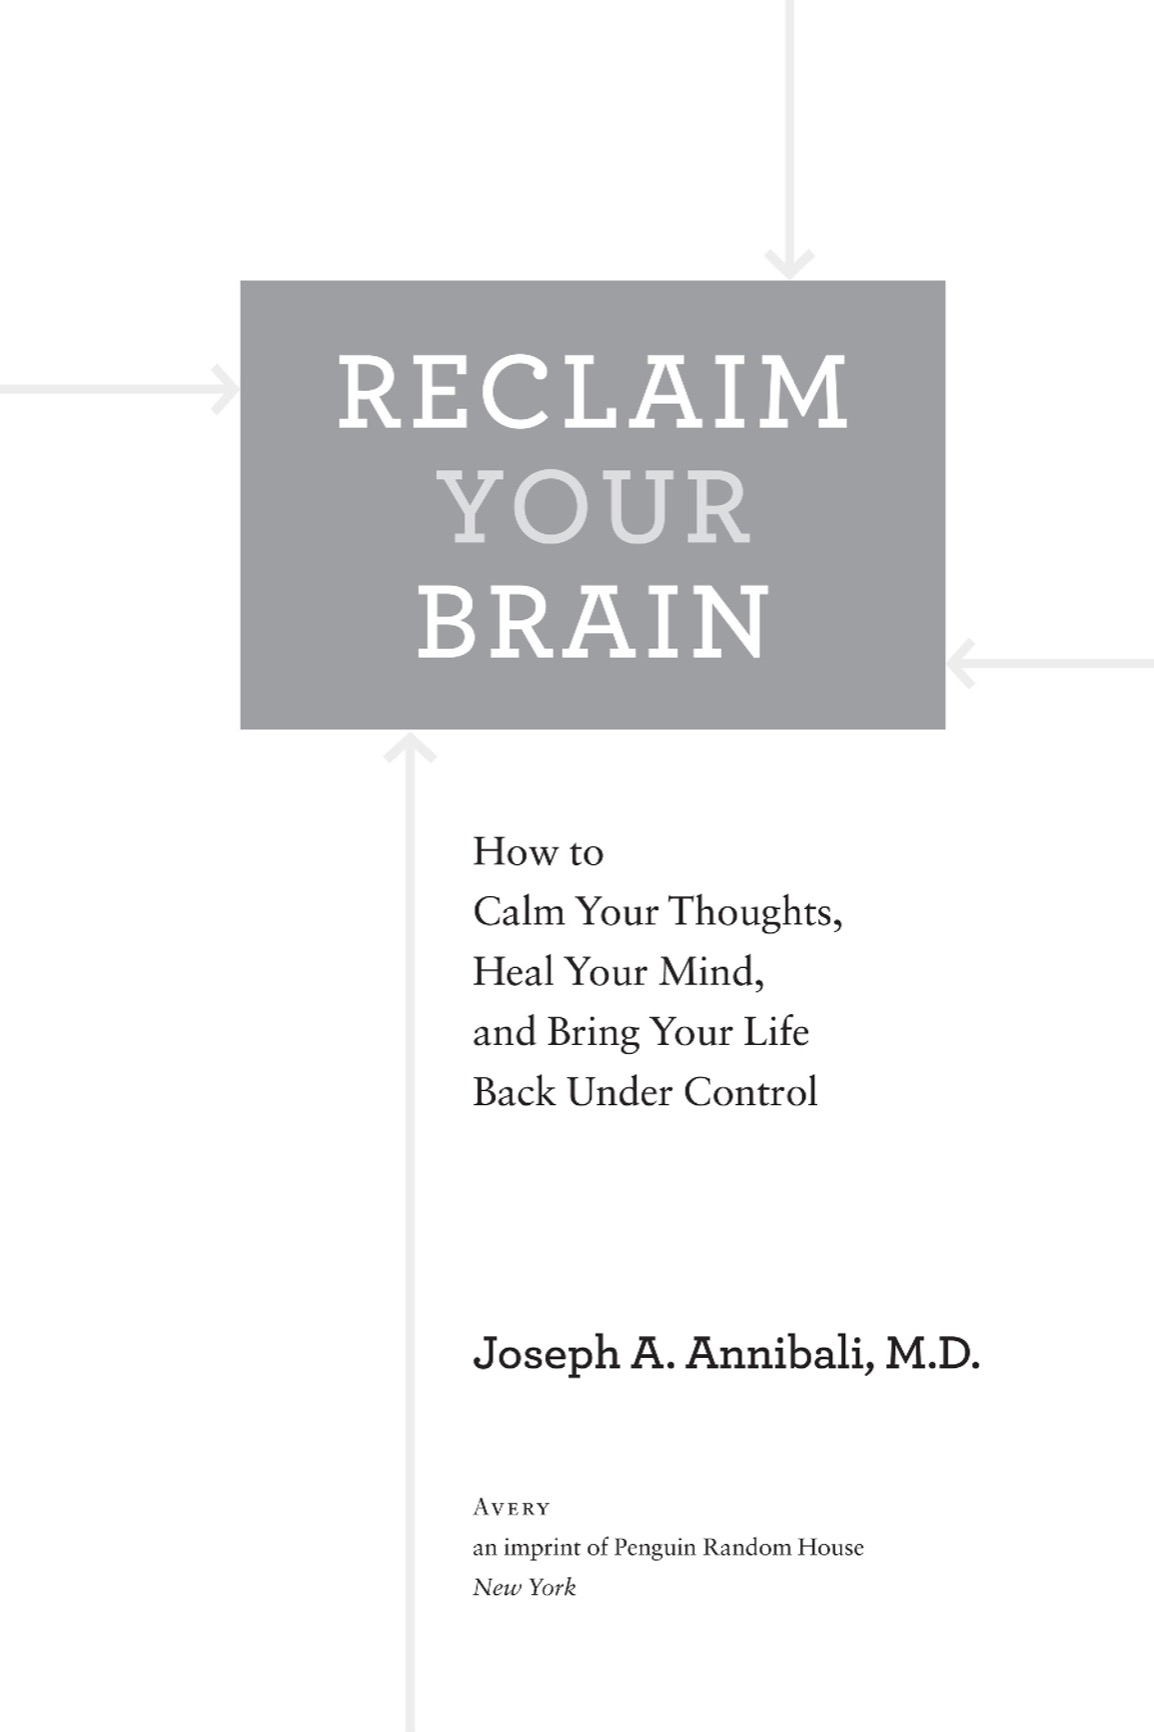 Reclaim Your Brain How to Calm Your Thoughts Heal Your Mind and Bring Your Life Back Under Control - image 2